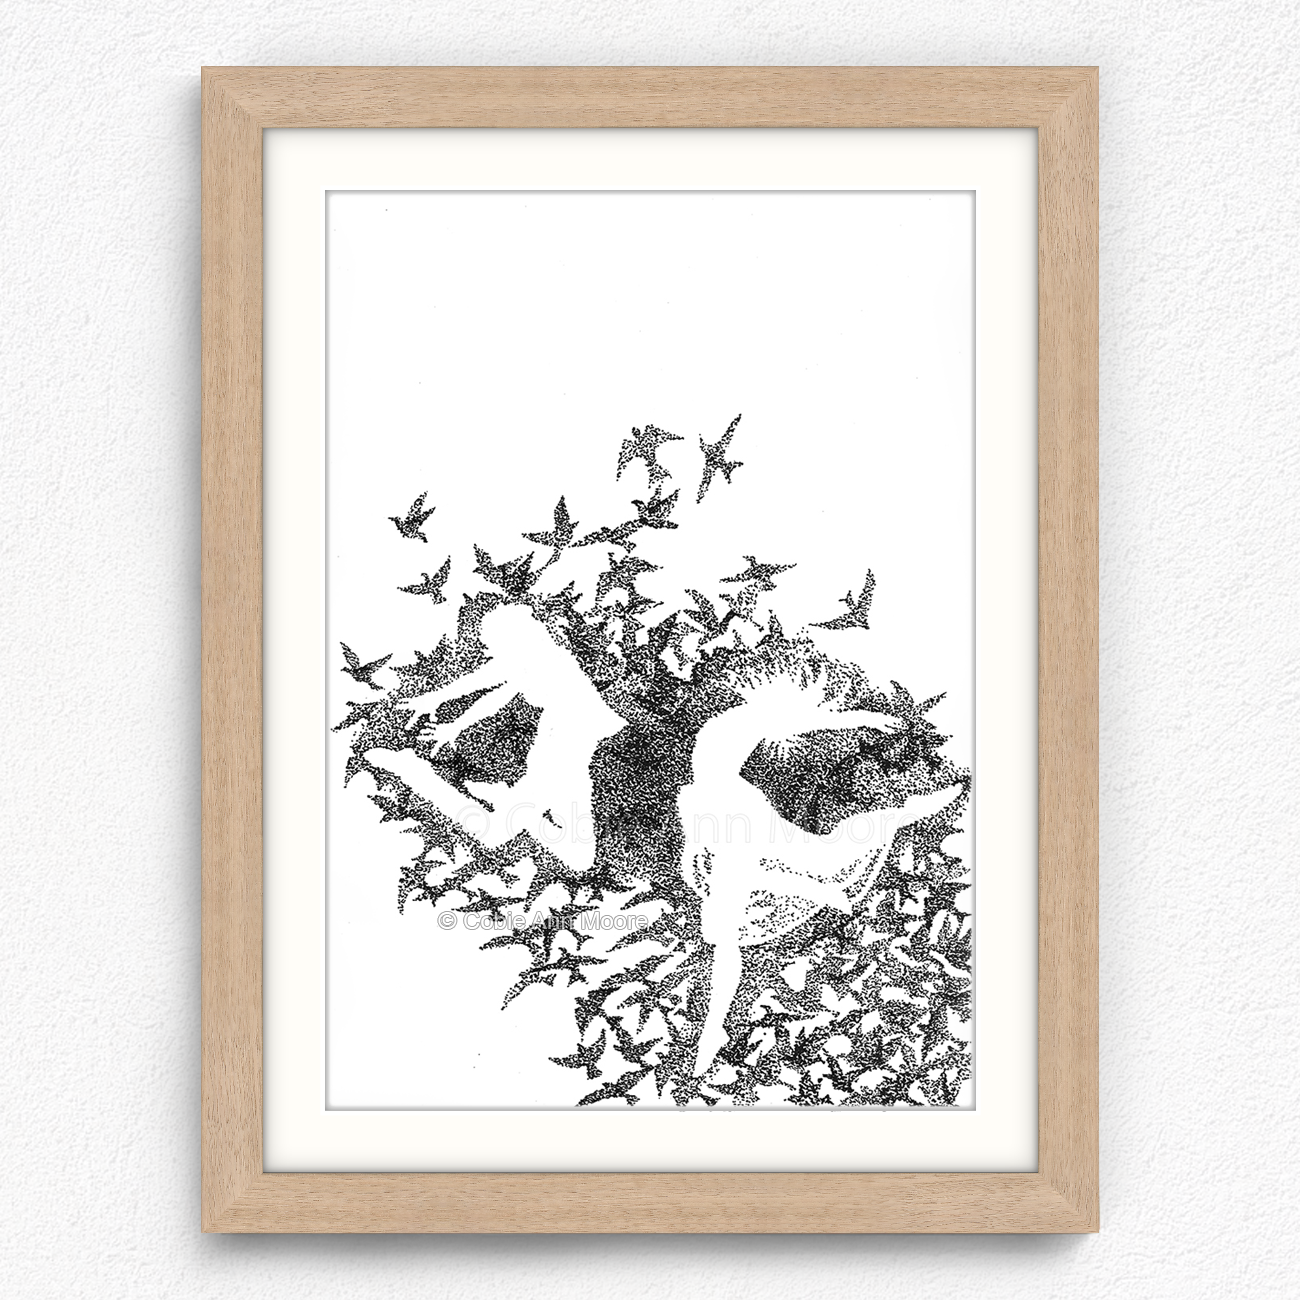 Dancing With Birds print in a raw oak A4 frame